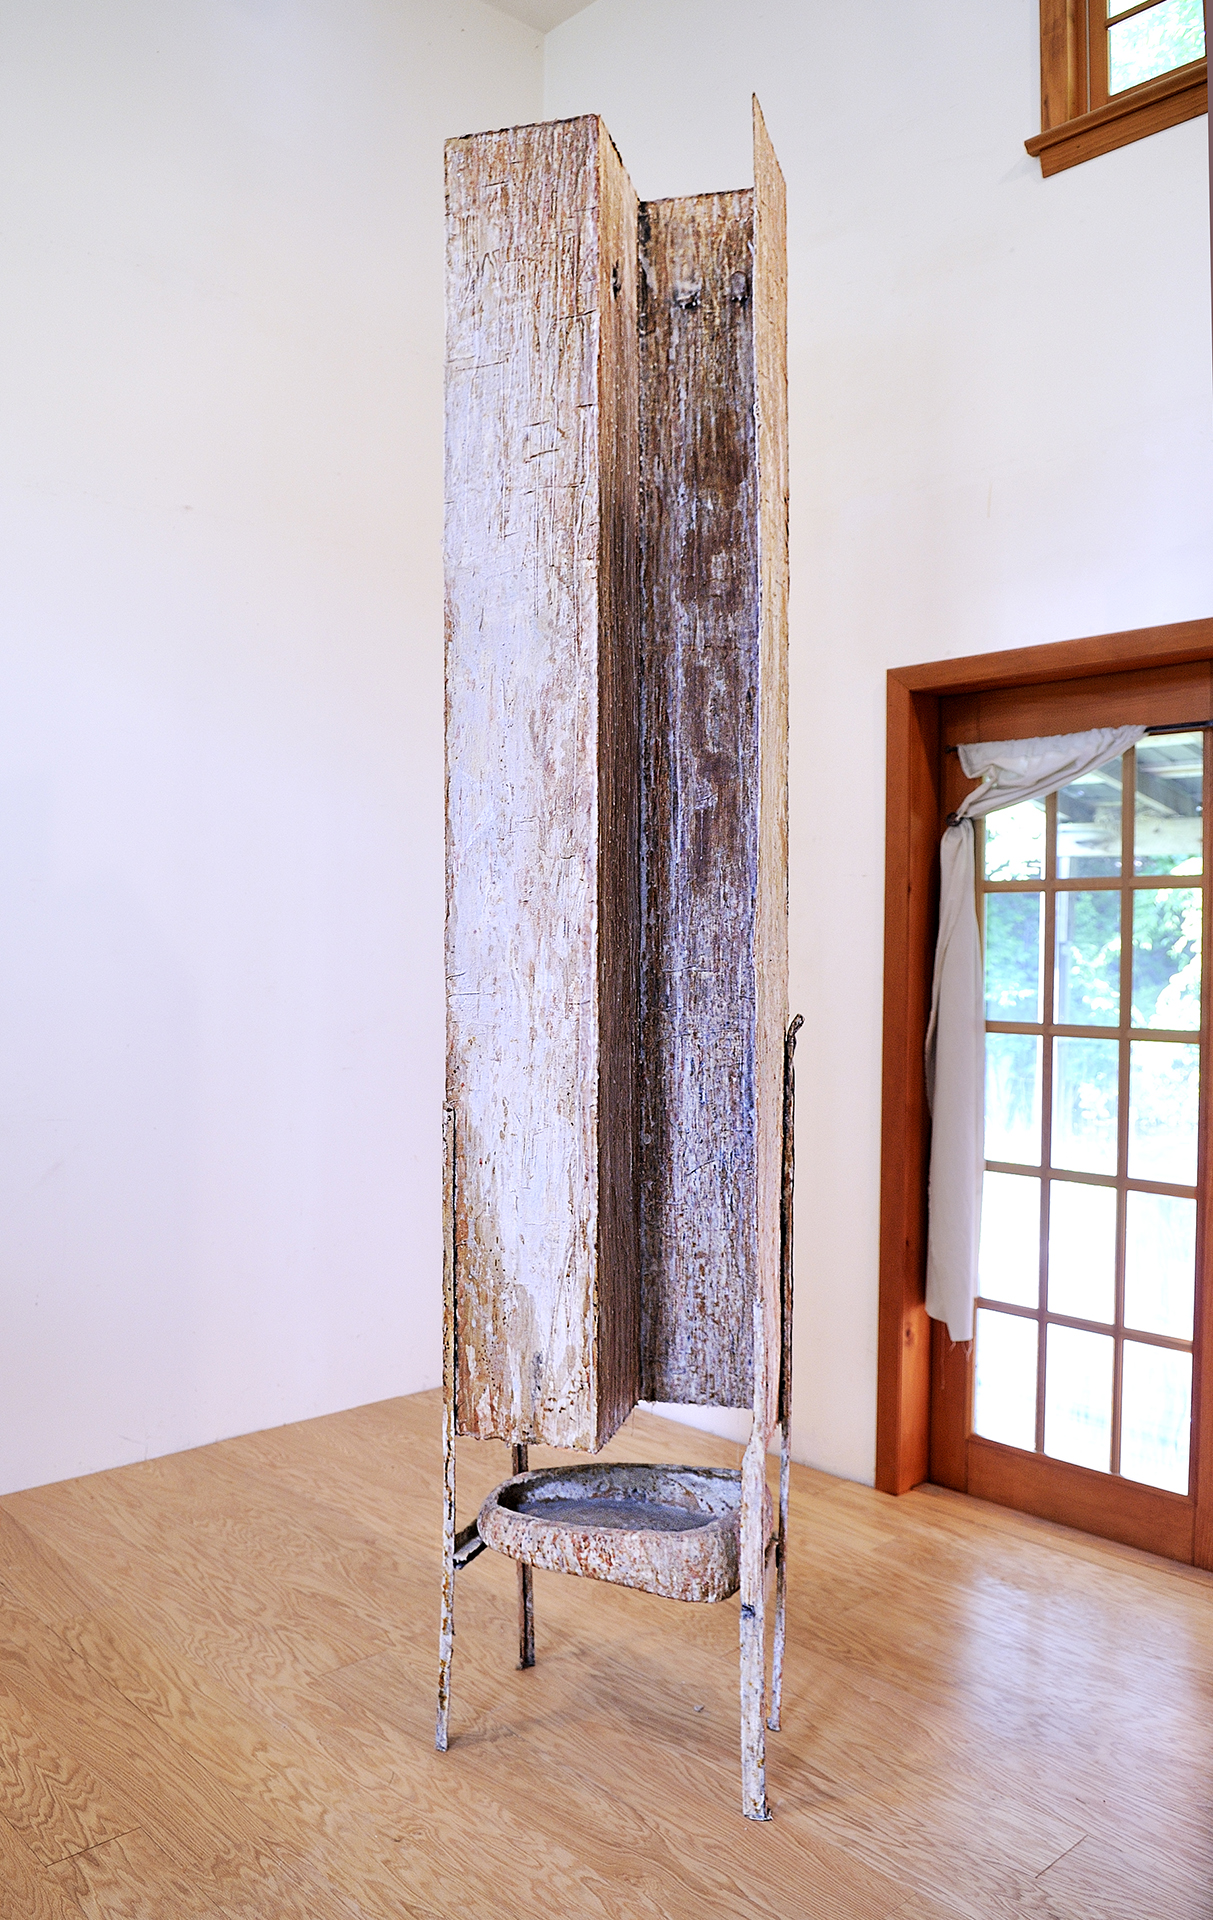 Wax Works – Pure no.5, 1997 plaster, fabric, steel and wax 103 x 21 1/2 x 13 in